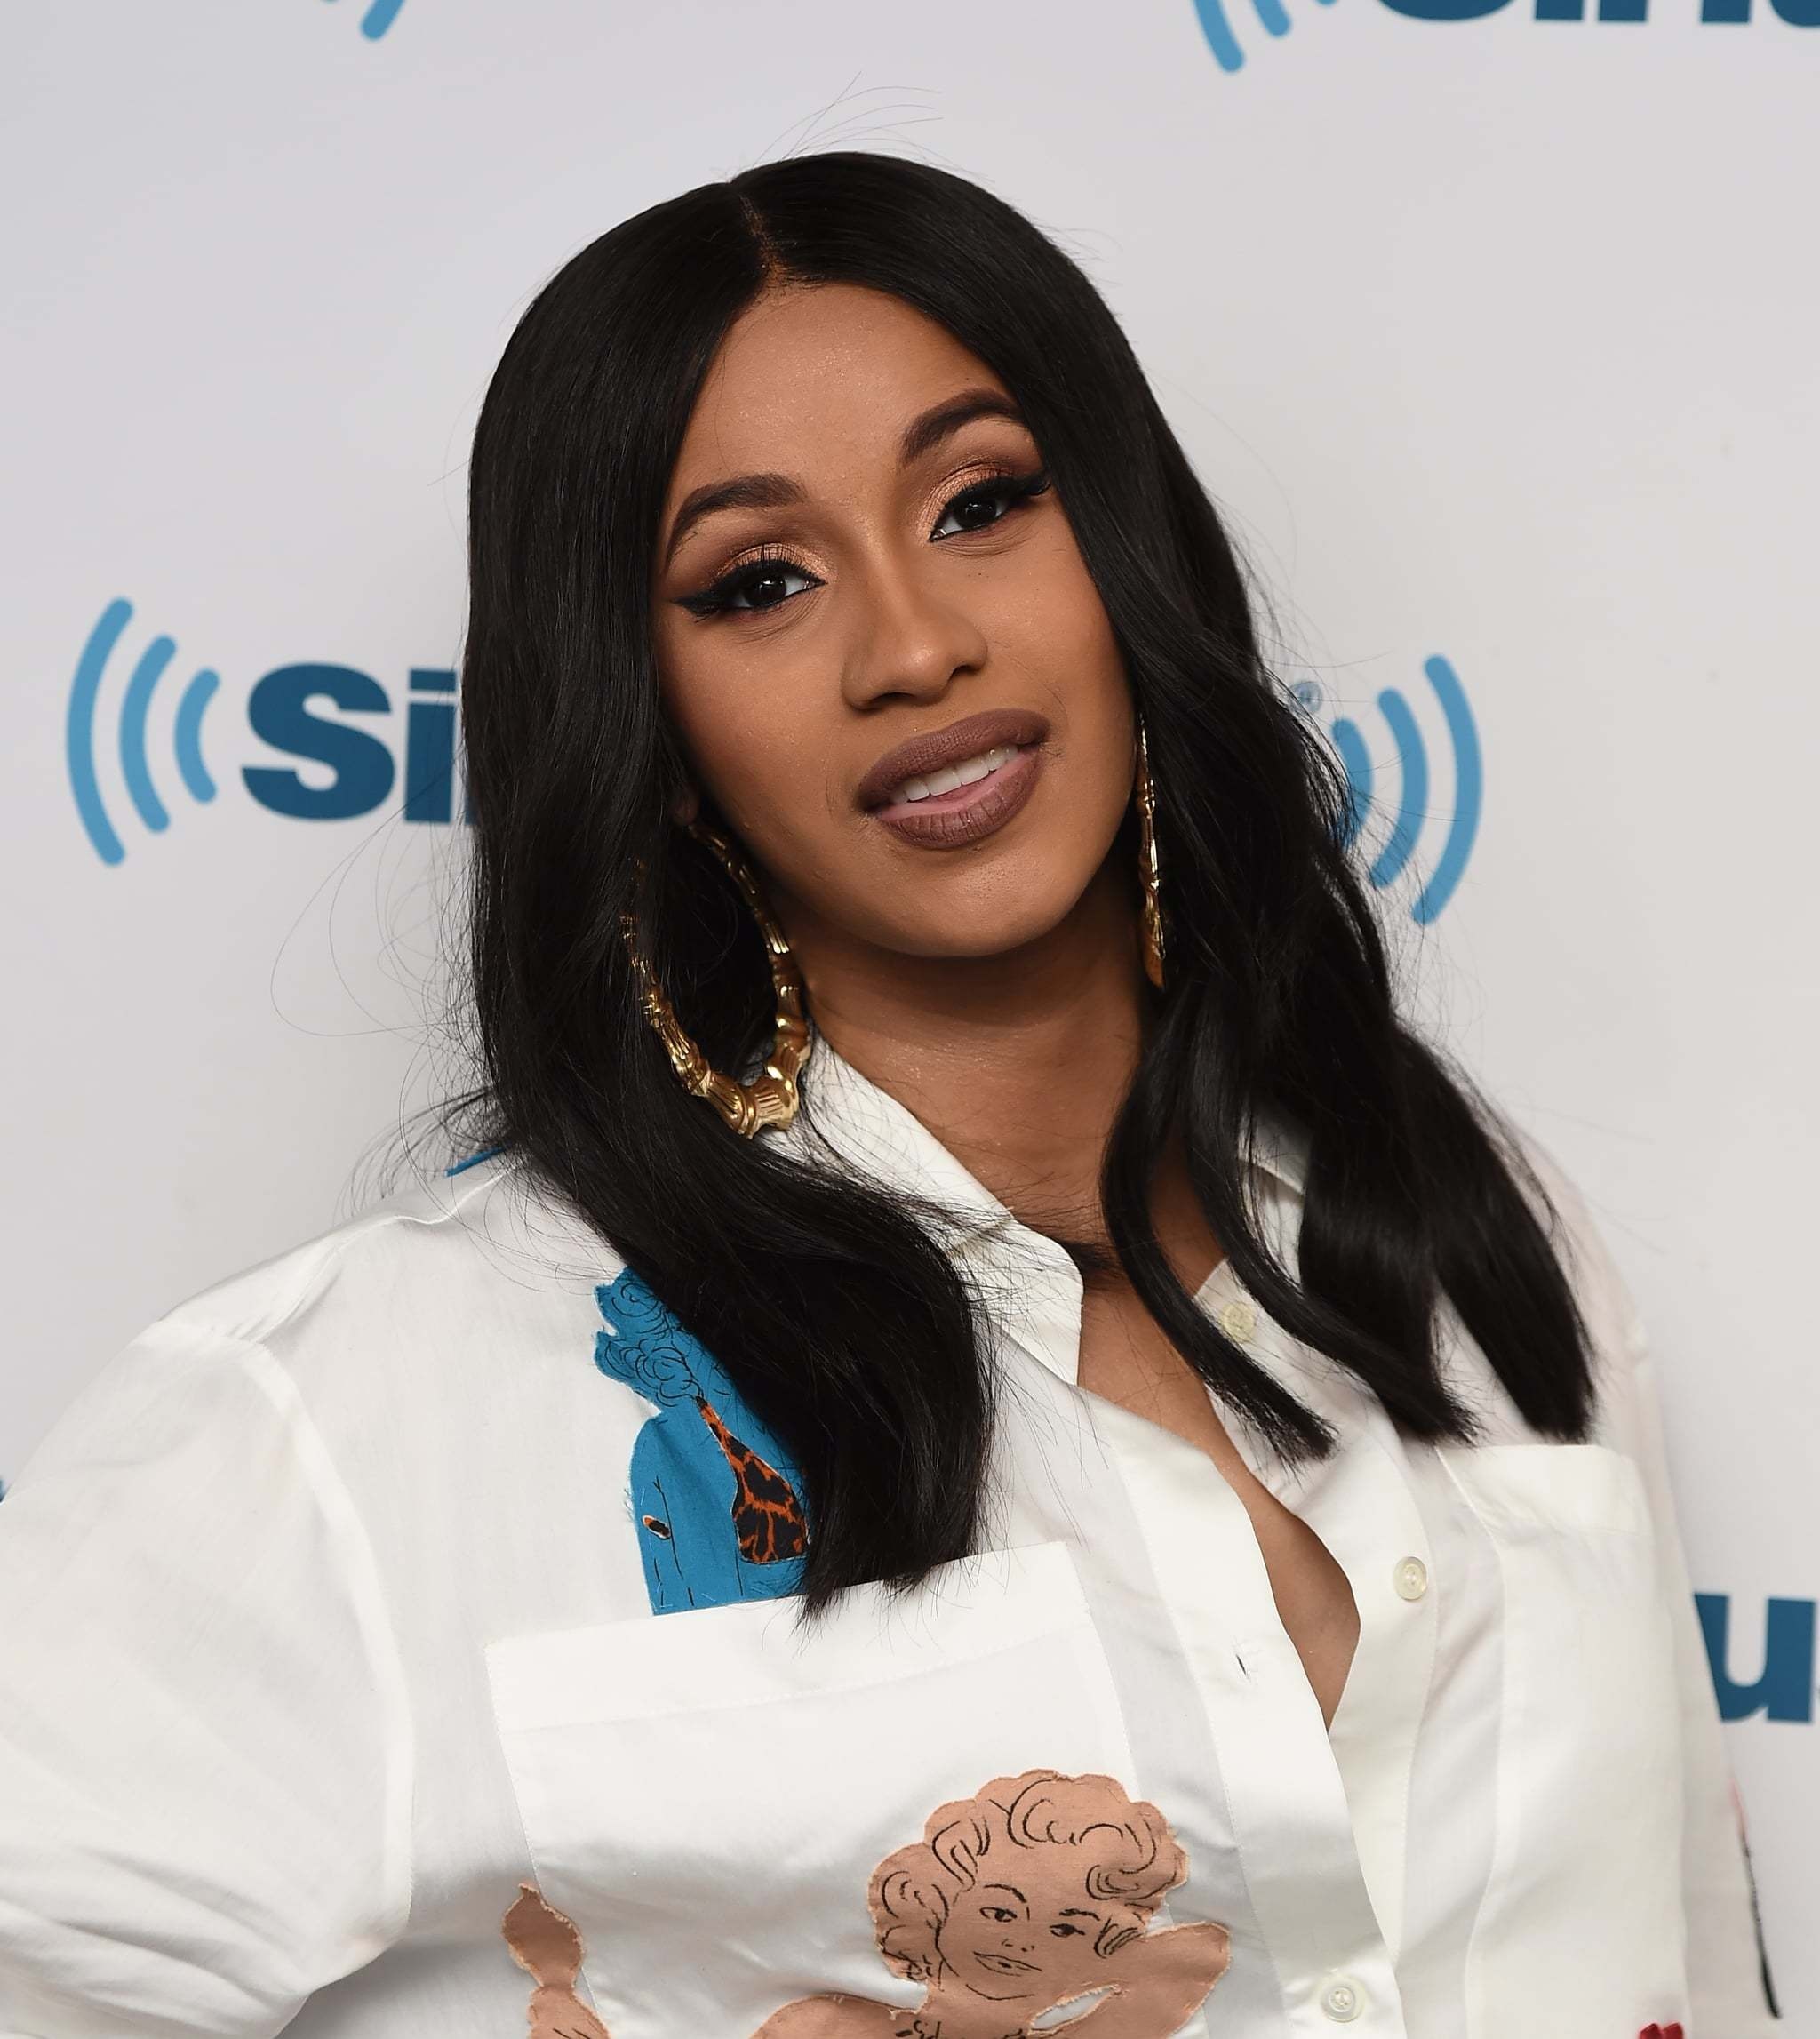 Cardi B looks different without makeup - 5